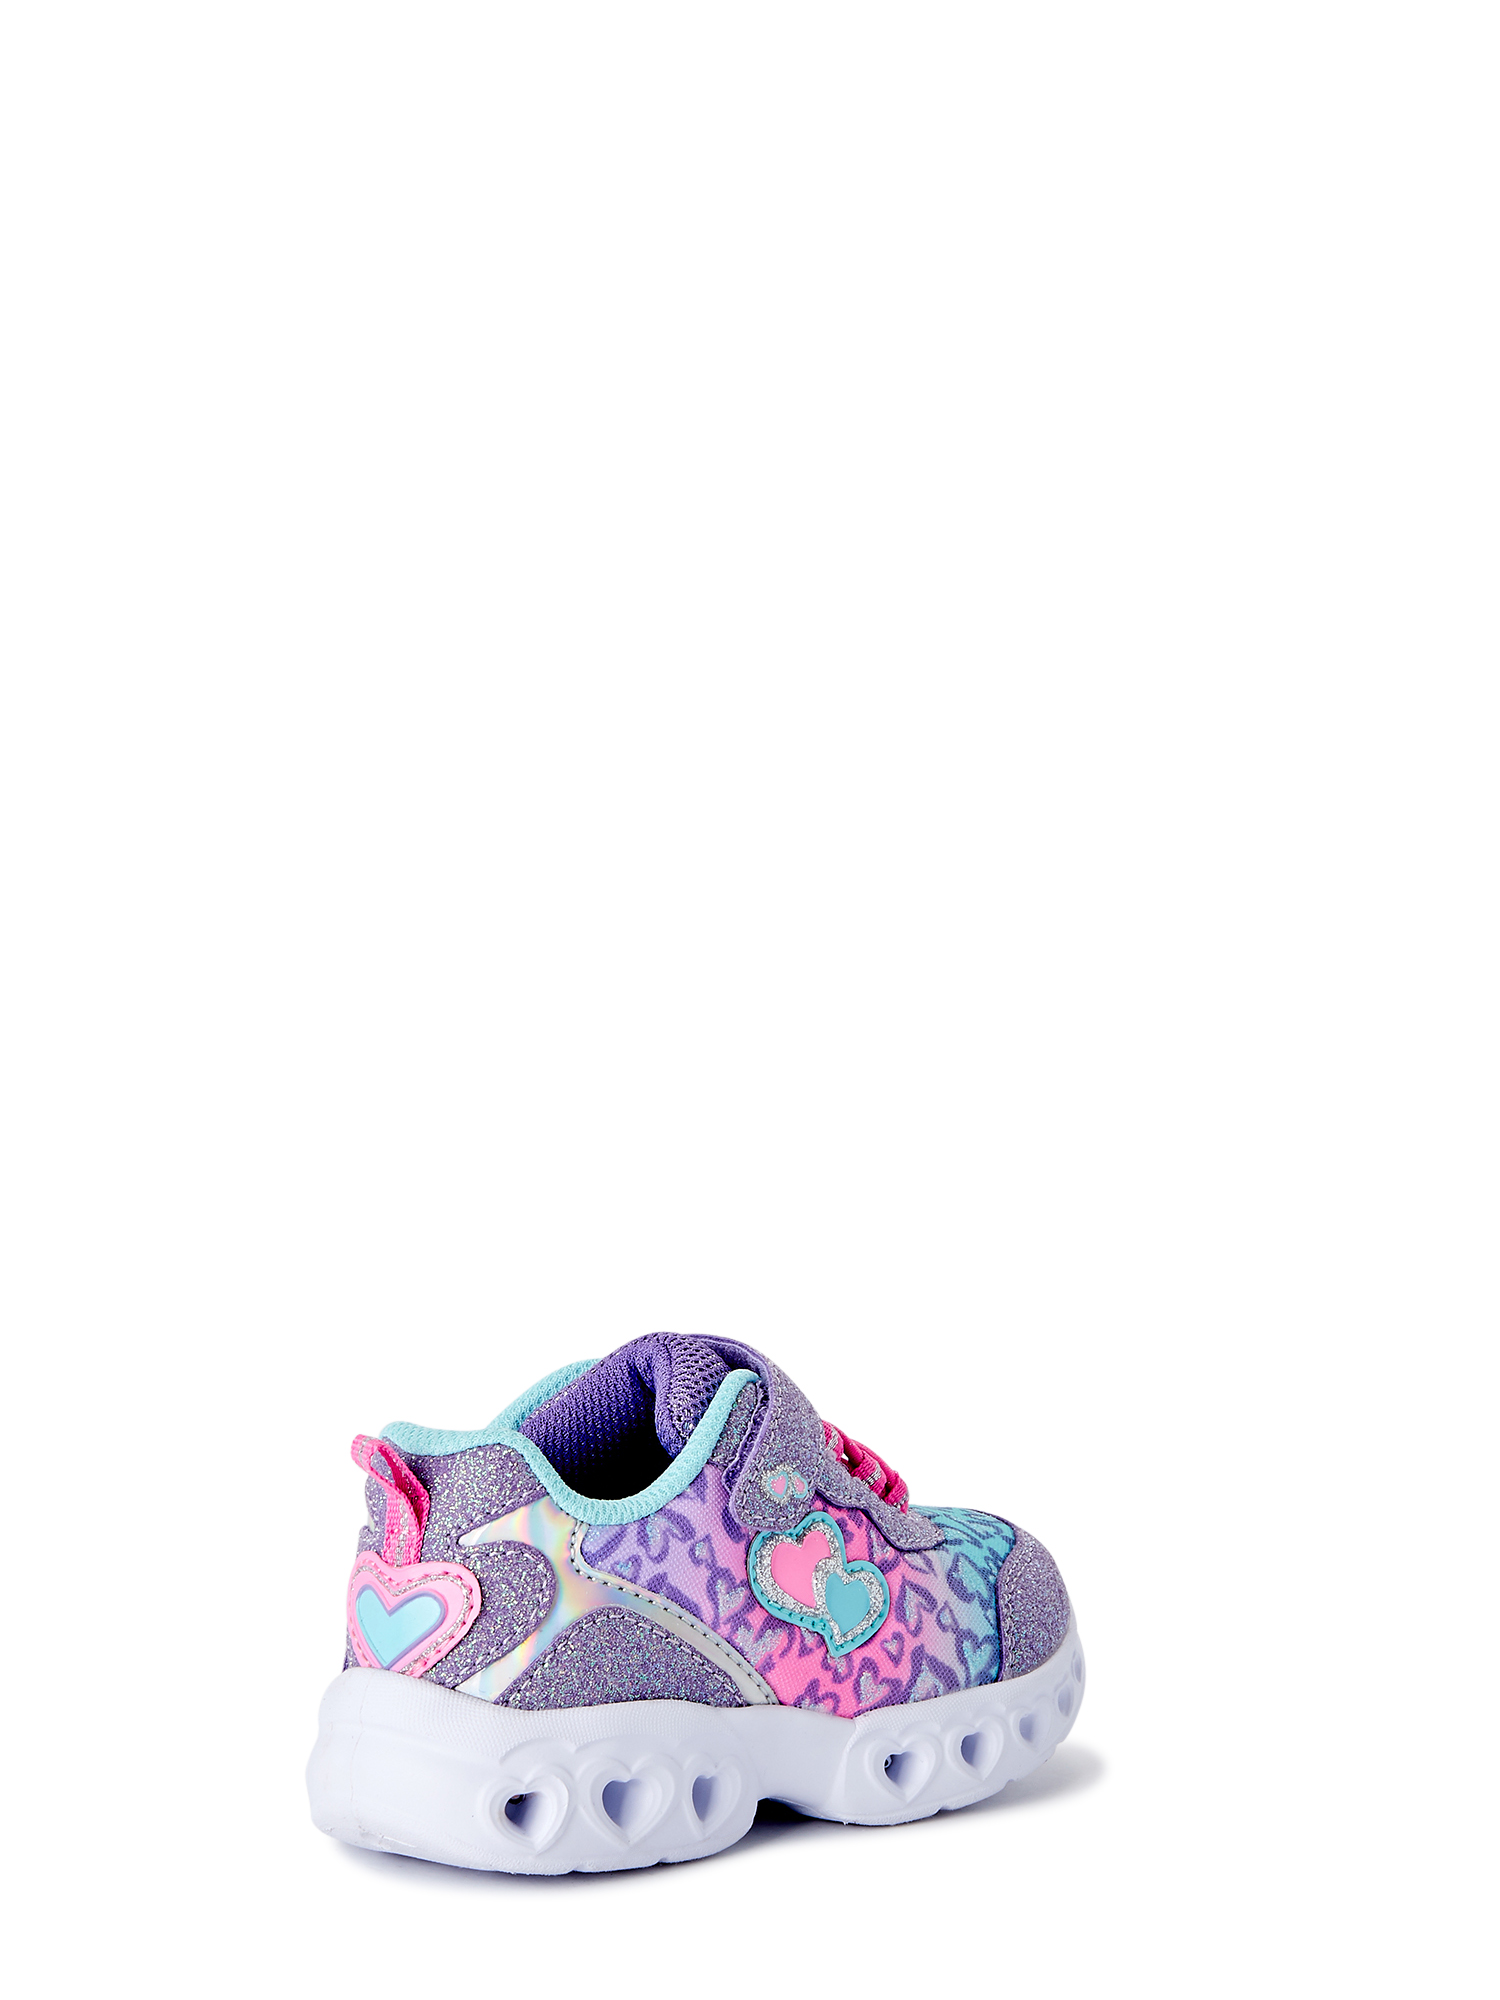 Schoenen Meisjesschoenen Sneakers & Sportschoenen Donut Shoes with Candy Sprinkles Hand Painted on White Sneakers for Toddler Size 9 Only 